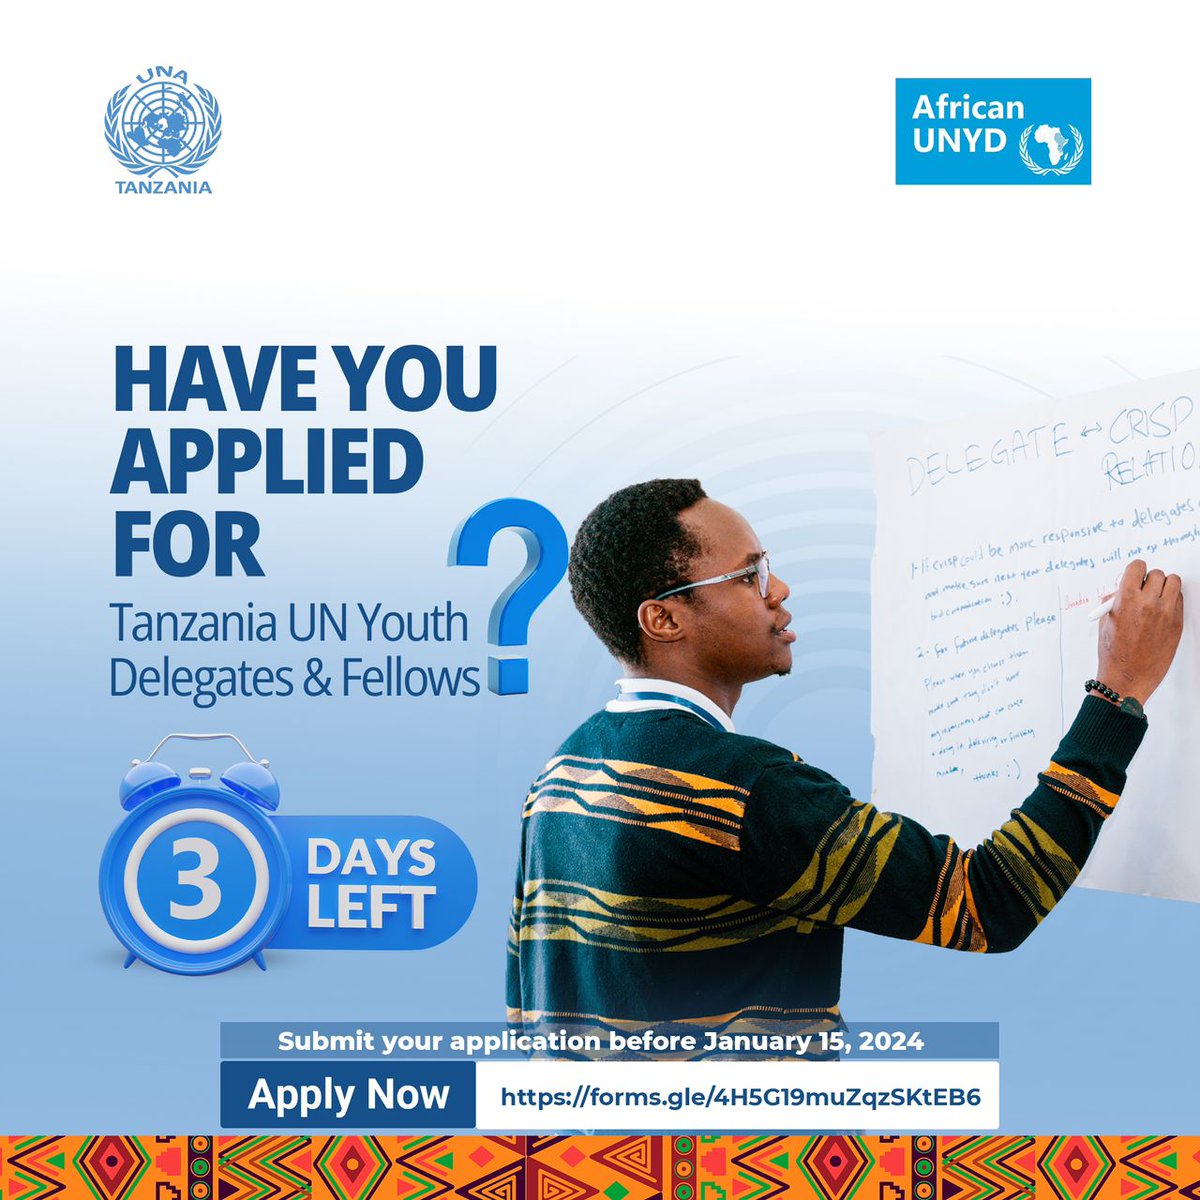 Passionate about global change? 🌍 Ready to be the voice of youth at the UN? 

Applying for the Tanzania UN Youth Delegate & Fellows opportunity – 3 days to make a difference!⏳

Apply 🔗: forms.gle/4H5G19muZqzSKt…

Deadline 🛑:15th January 2024

#AUNYDTz
#AUNYD2024